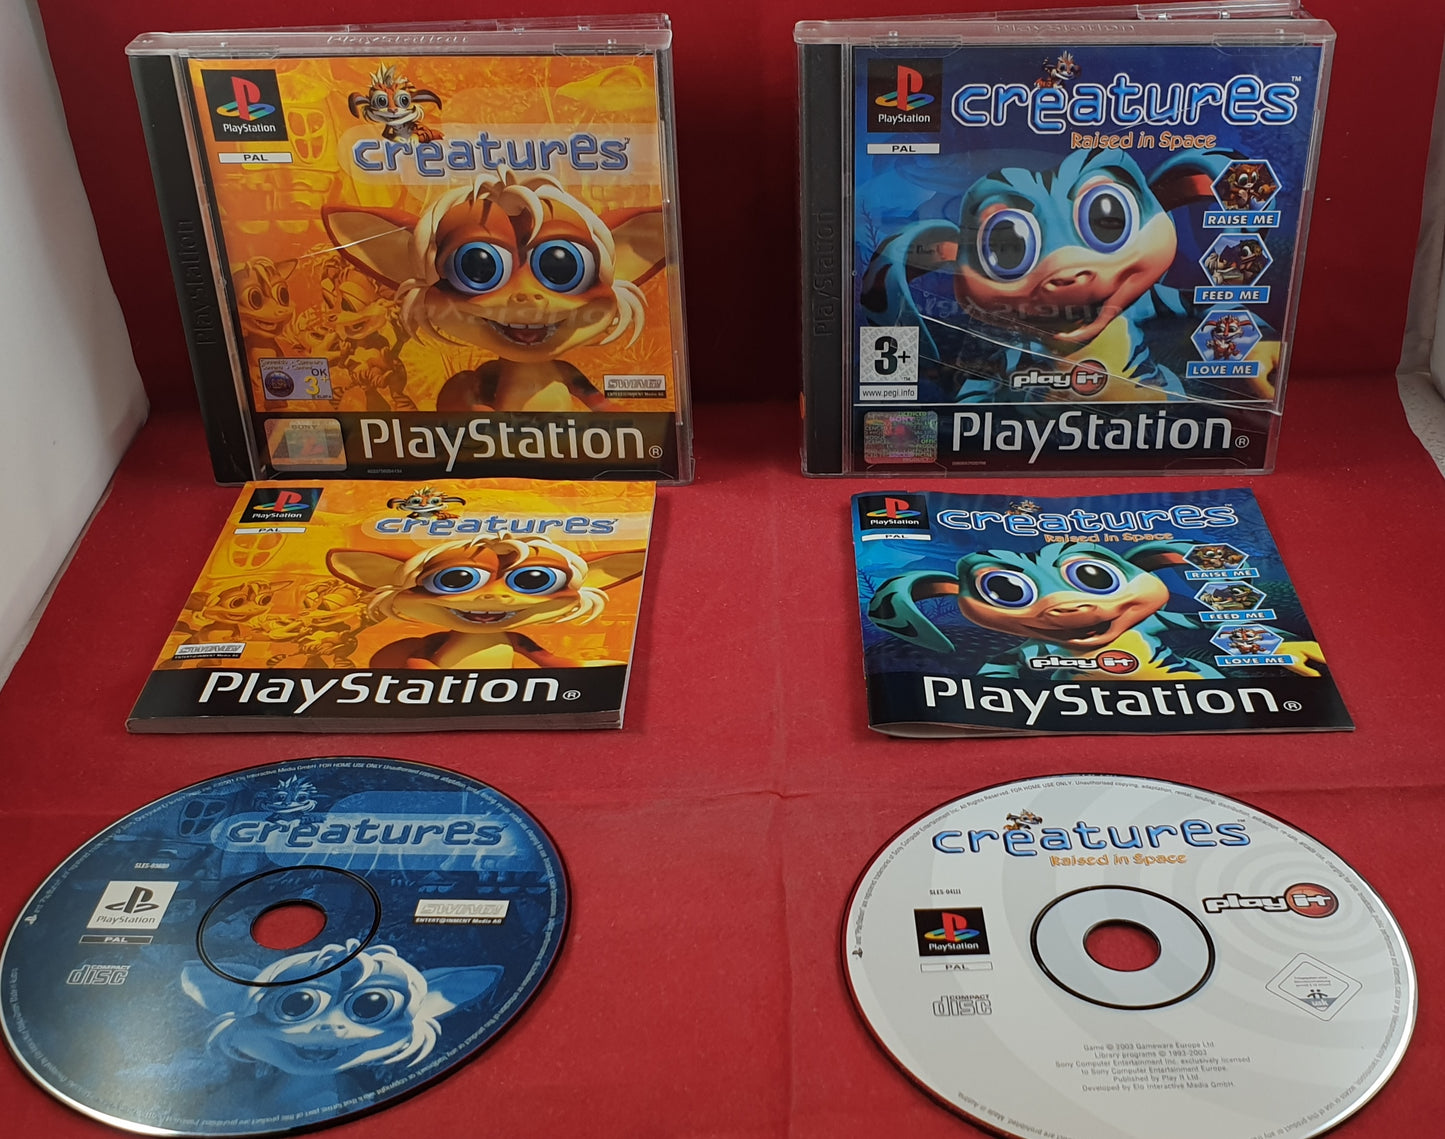 Creatures & Creatures Raised in Space PS1 (Sony PlayStation 1) game bundle